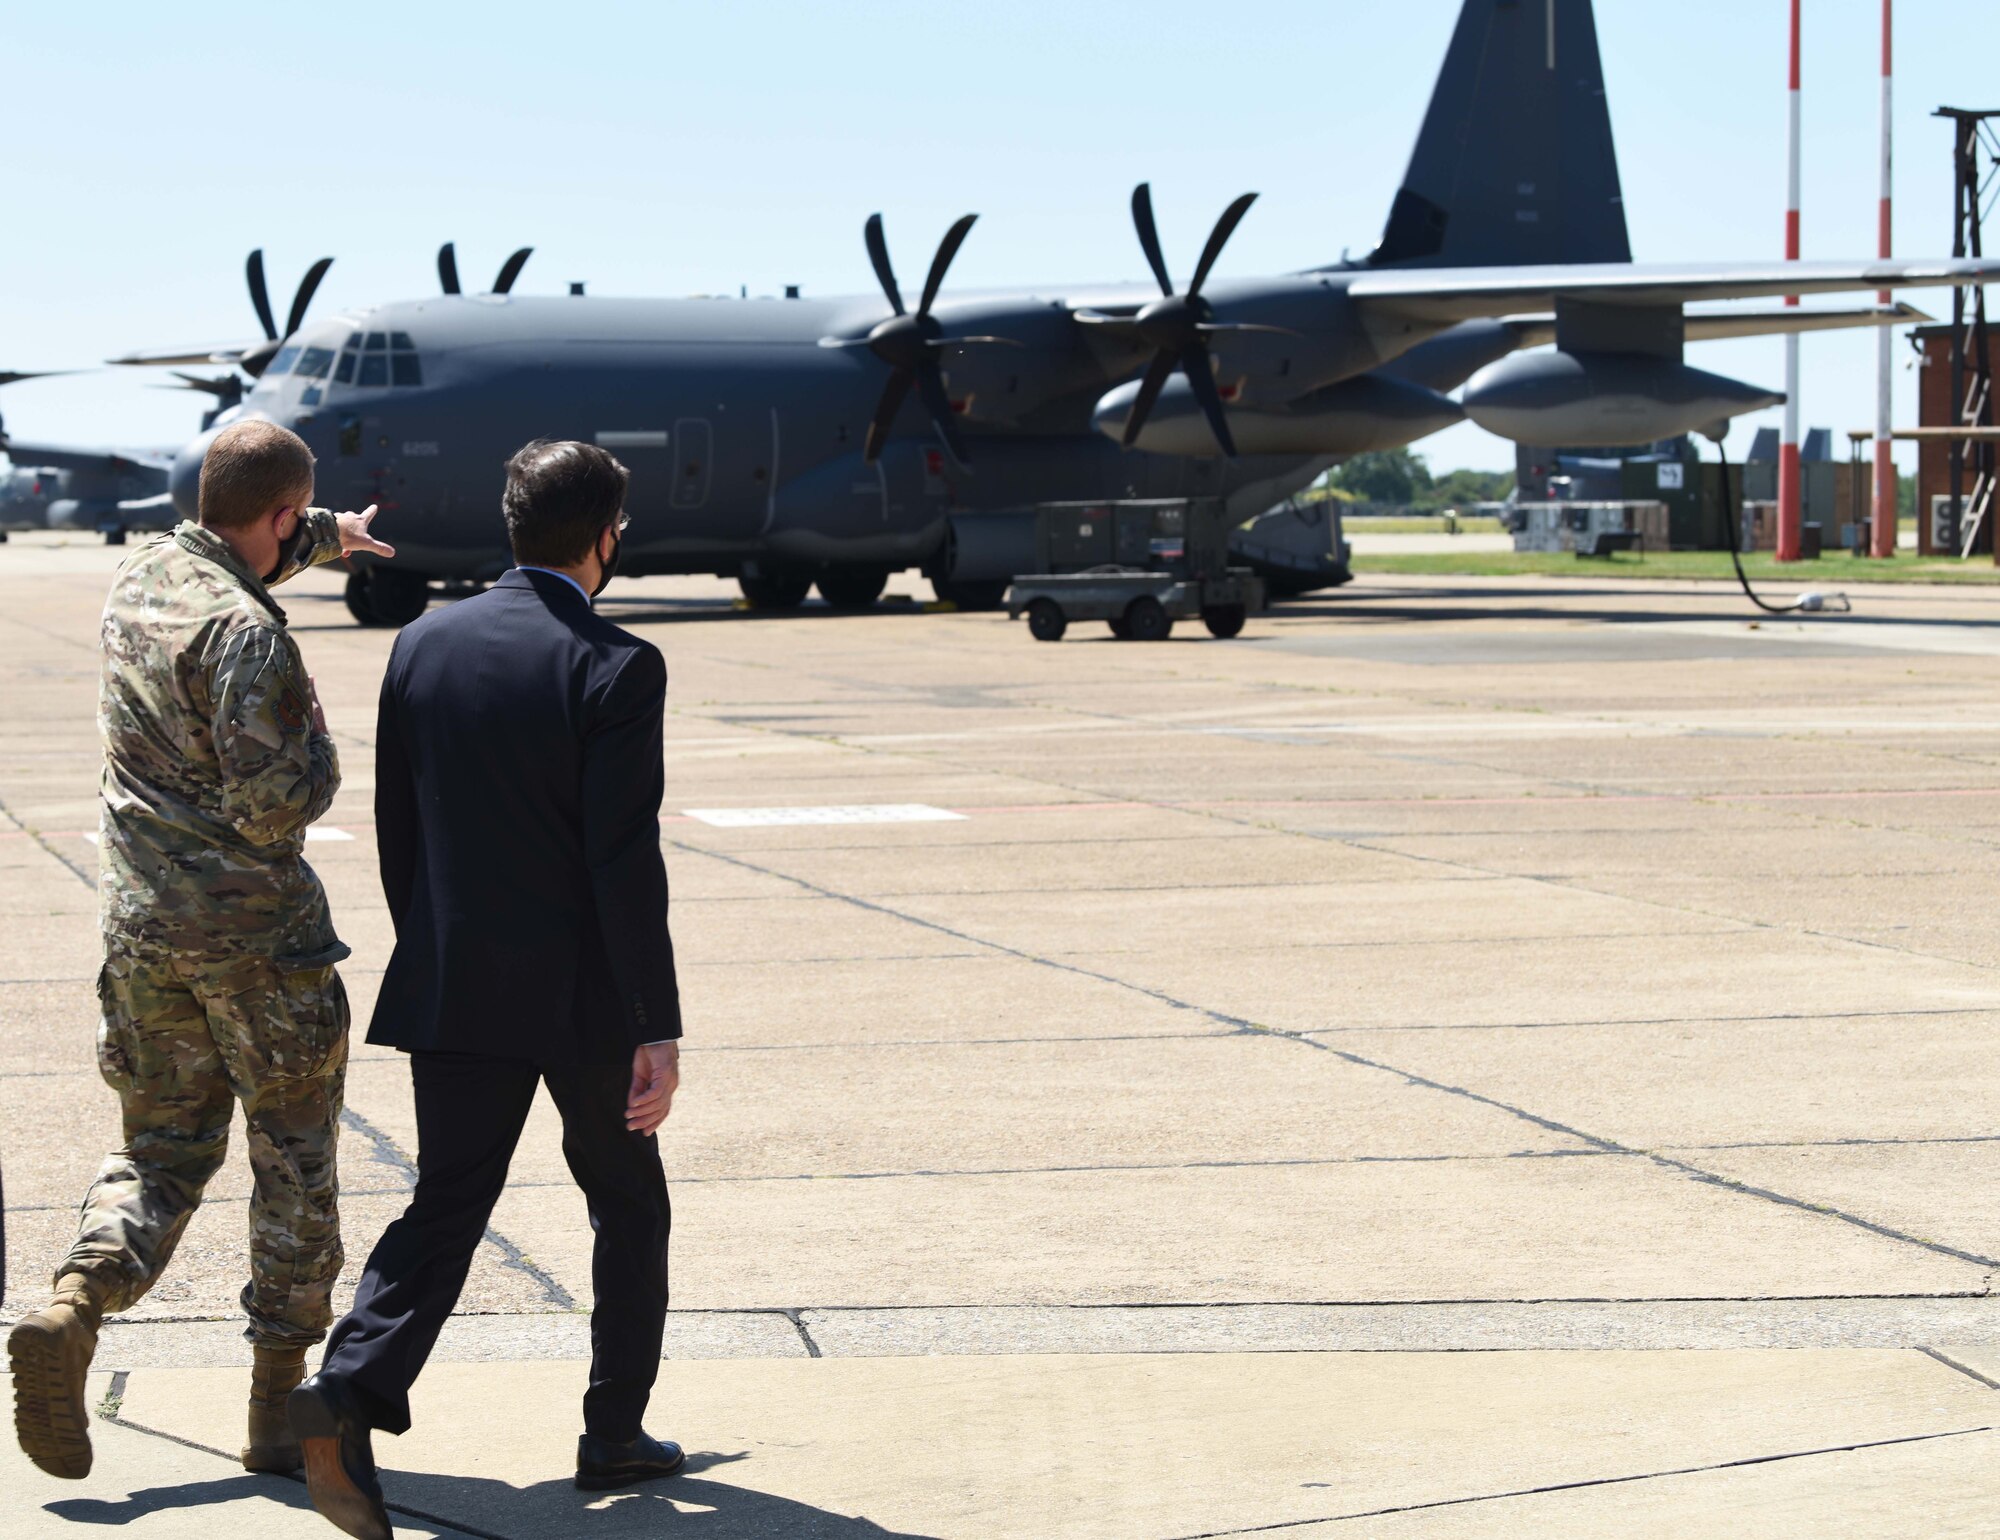 Colonel Clay Freeman, 352nd Special Operations Wing commander, speaks with U.S. Secretary of Defense Dr. Mark T. Esper during a visit to RAF Mildenhall, England, June 25, 2020. Esper toured the air traffic control tower, static displays of a CV-22 Osprey, RC-135 Rivet Joint and spent time speaking with both officer and enlisted Airmen during his tour. (U.S. Air Force photo by Senior Airman Brandon Esau)